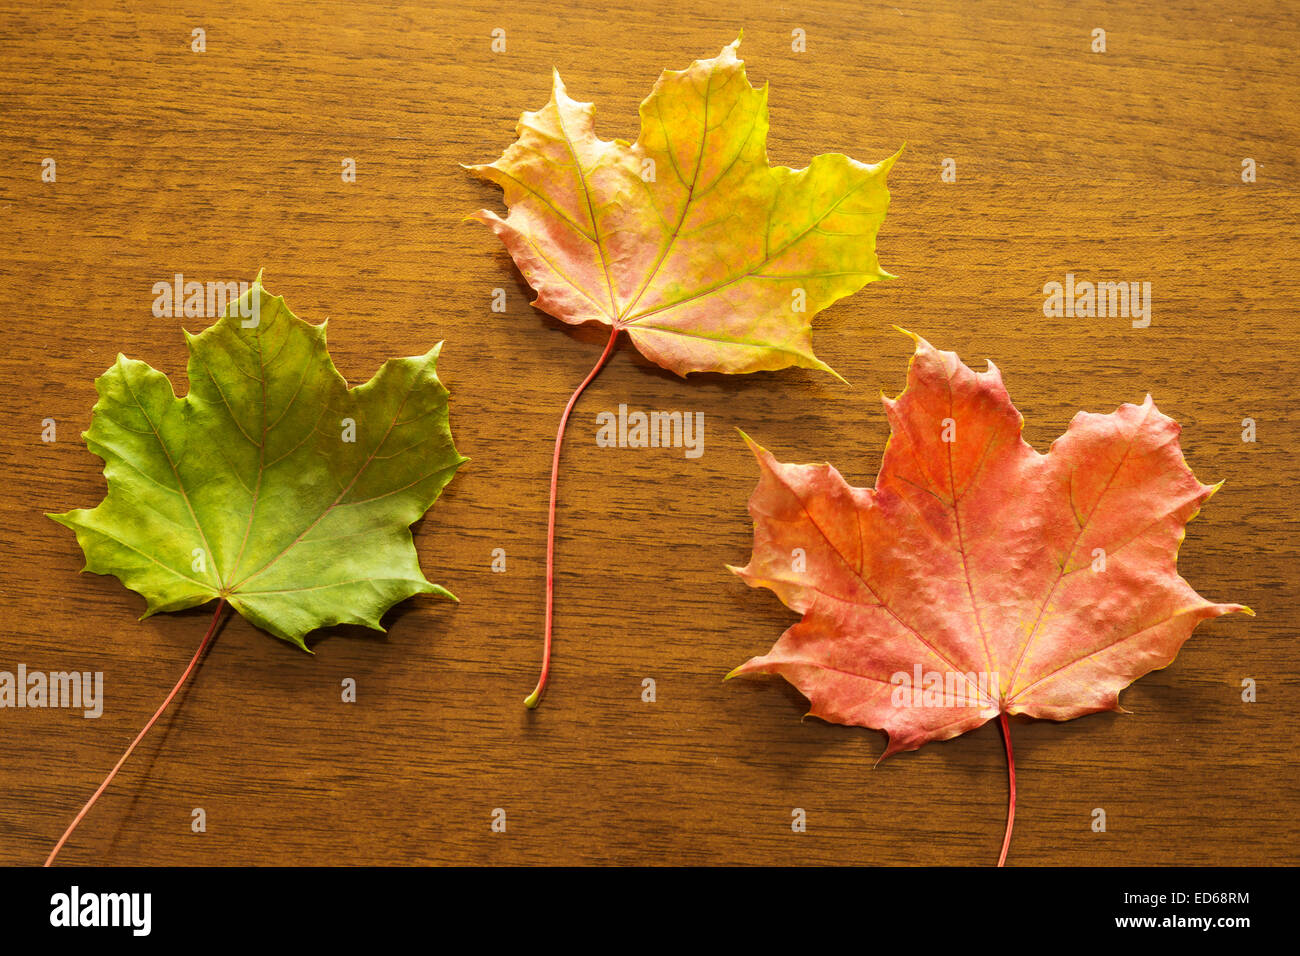 autumn leaves in different colors on table Stock Photo